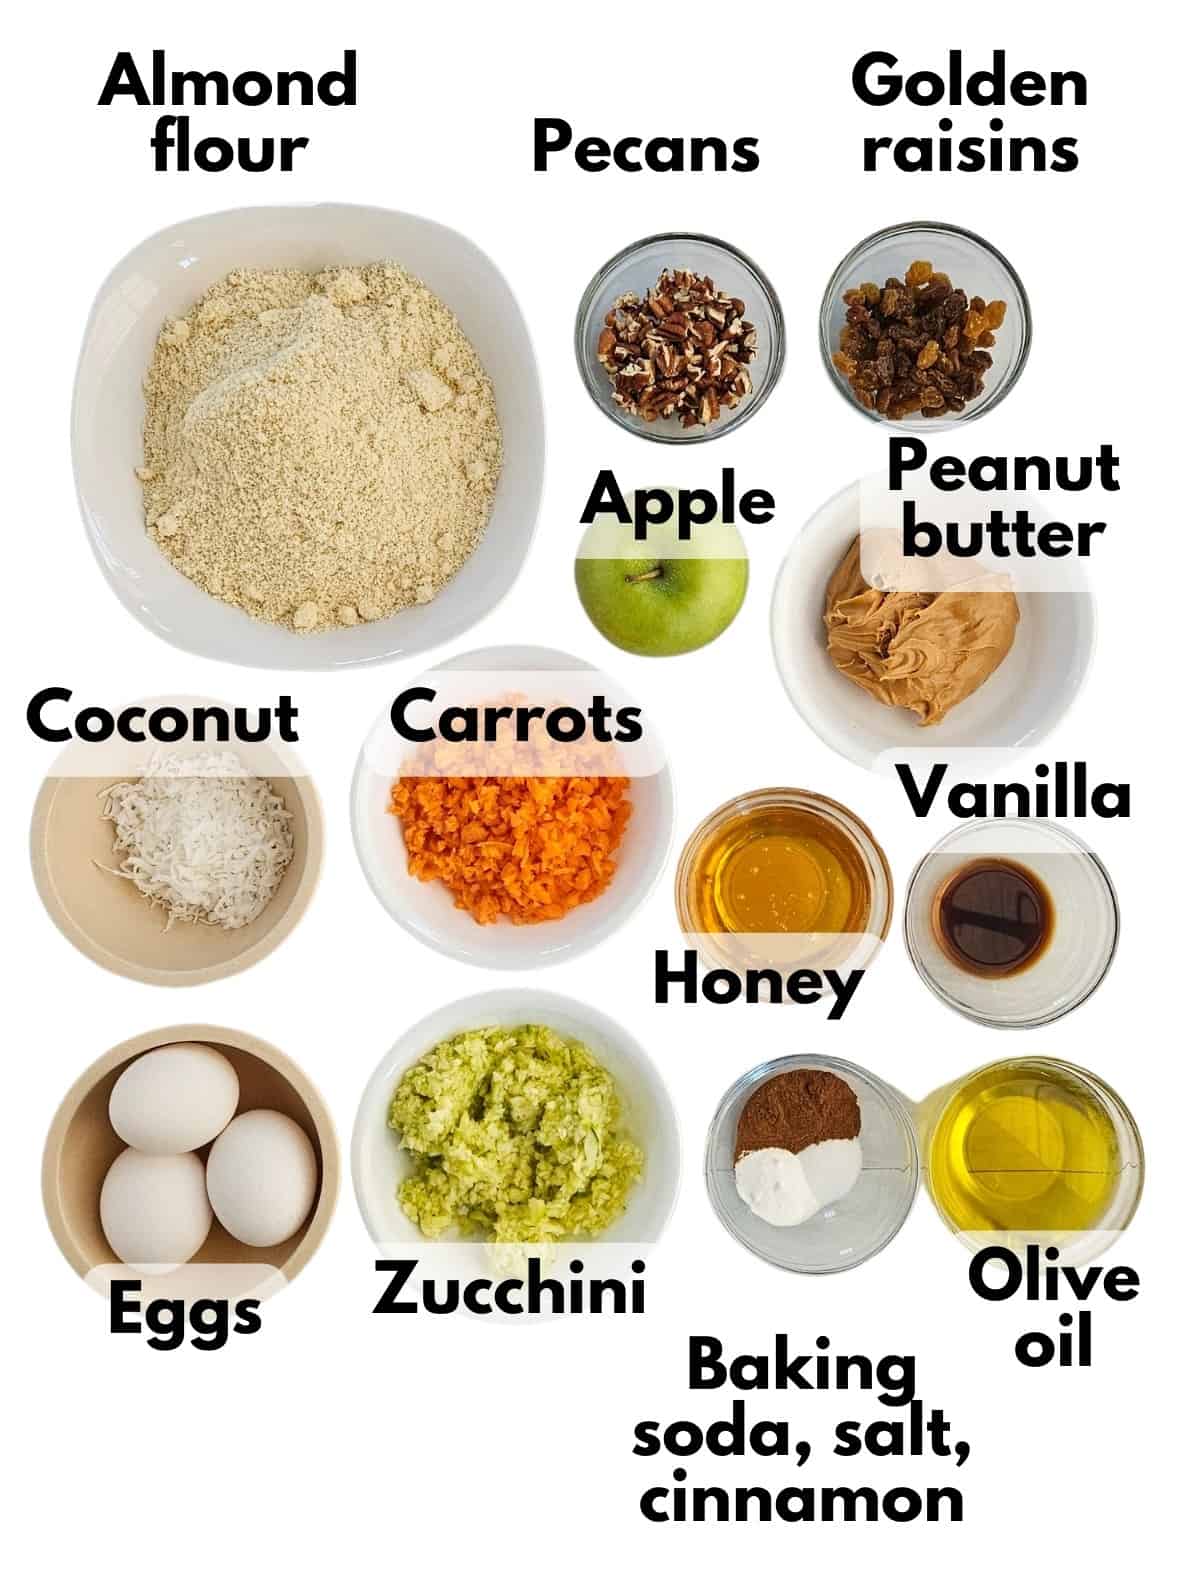 All of the ingredients to make the muffins on a white background, including peanut butter, oil, honey, eggs, vanilla, cinnamon, almond flour, salt, baking soda, apple, carrots, zucchini, coconut raisins, and nuts.